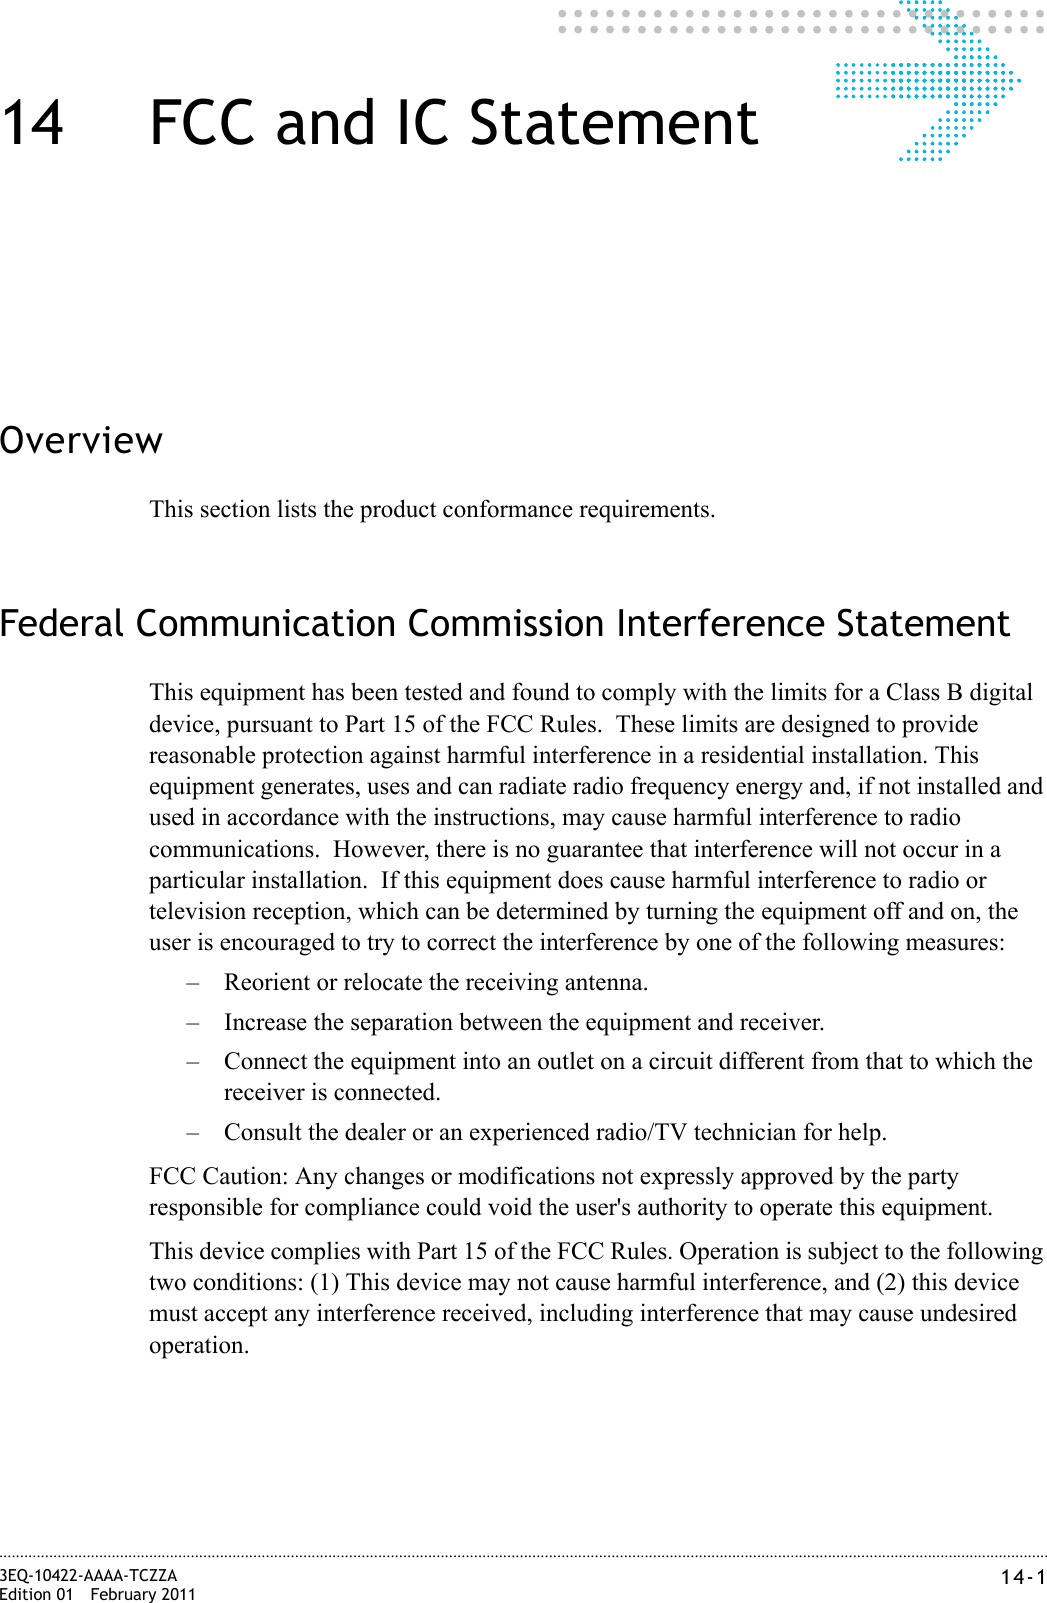 14-13EQ-10422-AAAA-TCZZAEdition 01 February 2011............................................................................................................................................................................................................................................................14 FCC and IC StatementOverviewThis section lists the product conformance requirements.Federal Communication Commission Interference StatementThis equipment has been tested and found to comply with the limits for a Class B digital device, pursuant to Part 15 of the FCC Rules.  These limits are designed to provide reasonable protection against harmful interference in a residential installation. This equipment generates, uses and can radiate radio frequency energy and, if not installed and used in accordance with the instructions, may cause harmful interference to radio communications.  However, there is no guarantee that interference will not occur in a particular installation.  If this equipment does cause harmful interference to radio or television reception, which can be determined by turning the equipment off and on, the user is encouraged to try to correct the interference by one of the following measures:– Reorient or relocate the receiving antenna.– Increase the separation between the equipment and receiver.– Connect the equipment into an outlet on a circuit different from that to which the receiver is connected.– Consult the dealer or an experienced radio/TV technician for help.FCC Caution: Any changes or modifications not expressly approved by the party responsible for compliance could void the user&apos;s authority to operate this equipment.This device complies with Part 15 of the FCC Rules. Operation is subject to the following two conditions: (1) This device may not cause harmful interference, and (2) this device must accept any interference received, including interference that may cause undesired operation.